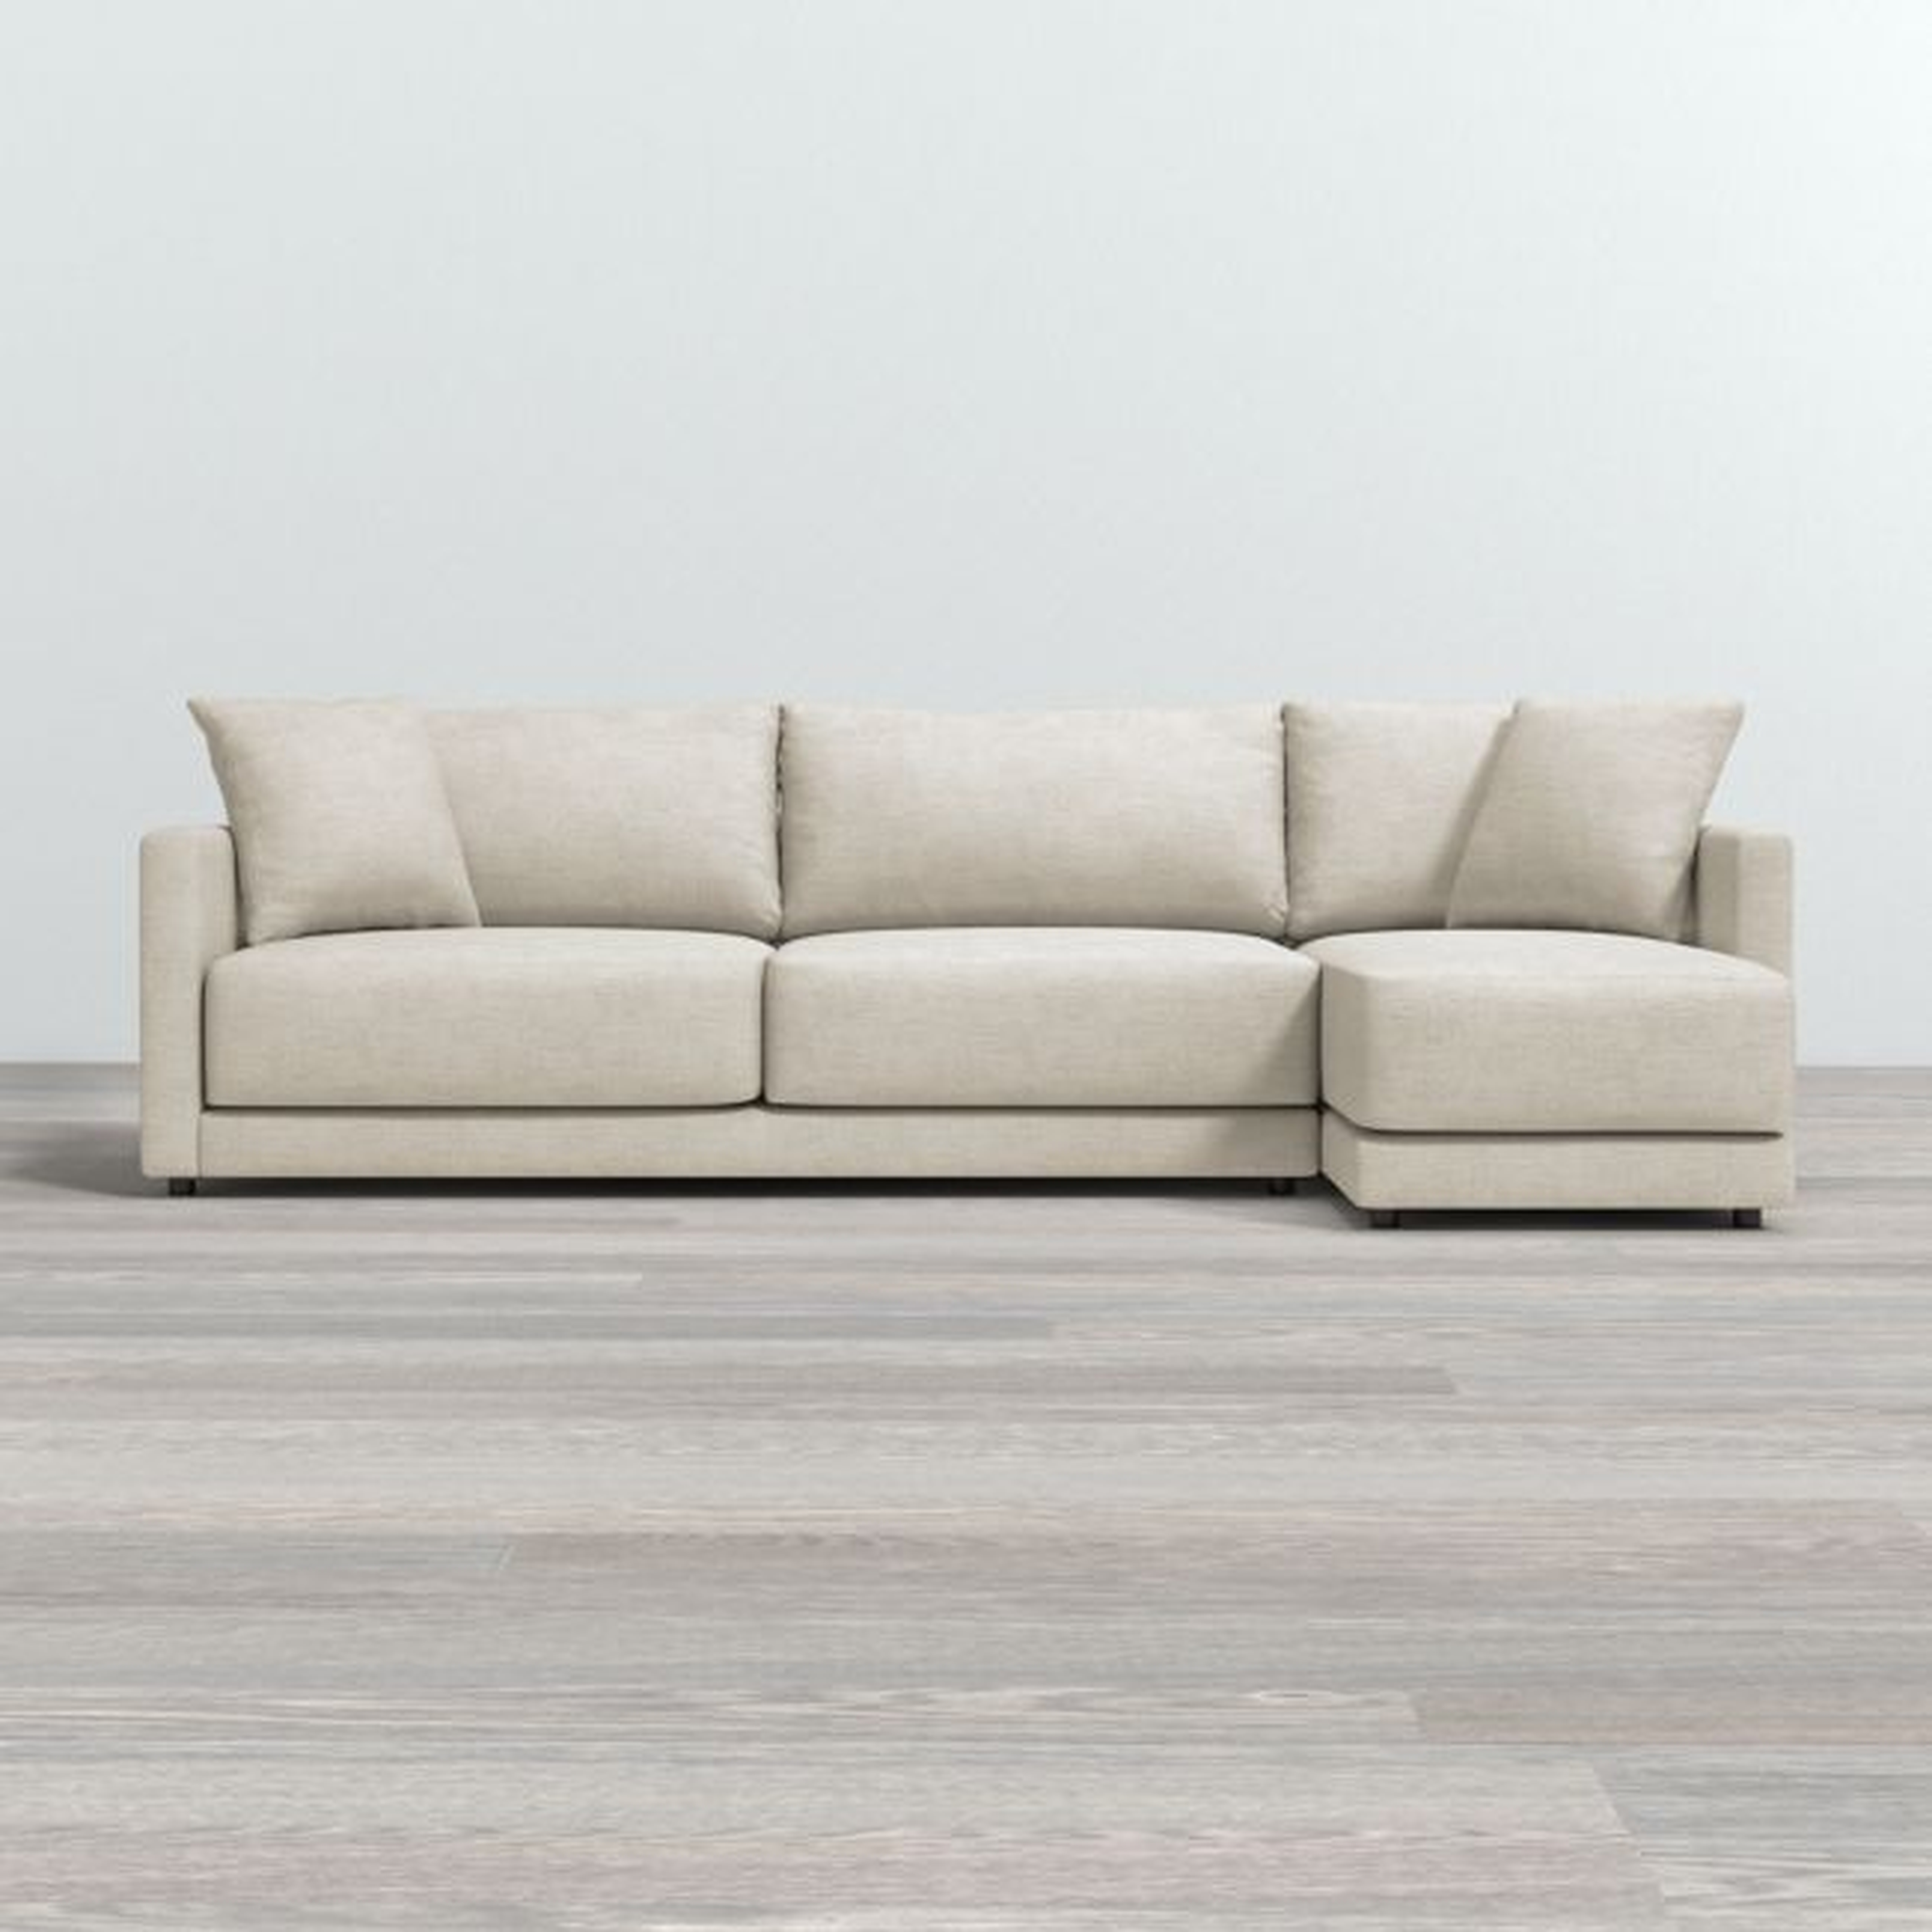 Gather 2-Piece Right Arm Chaise Sectional - Crate and Barrel